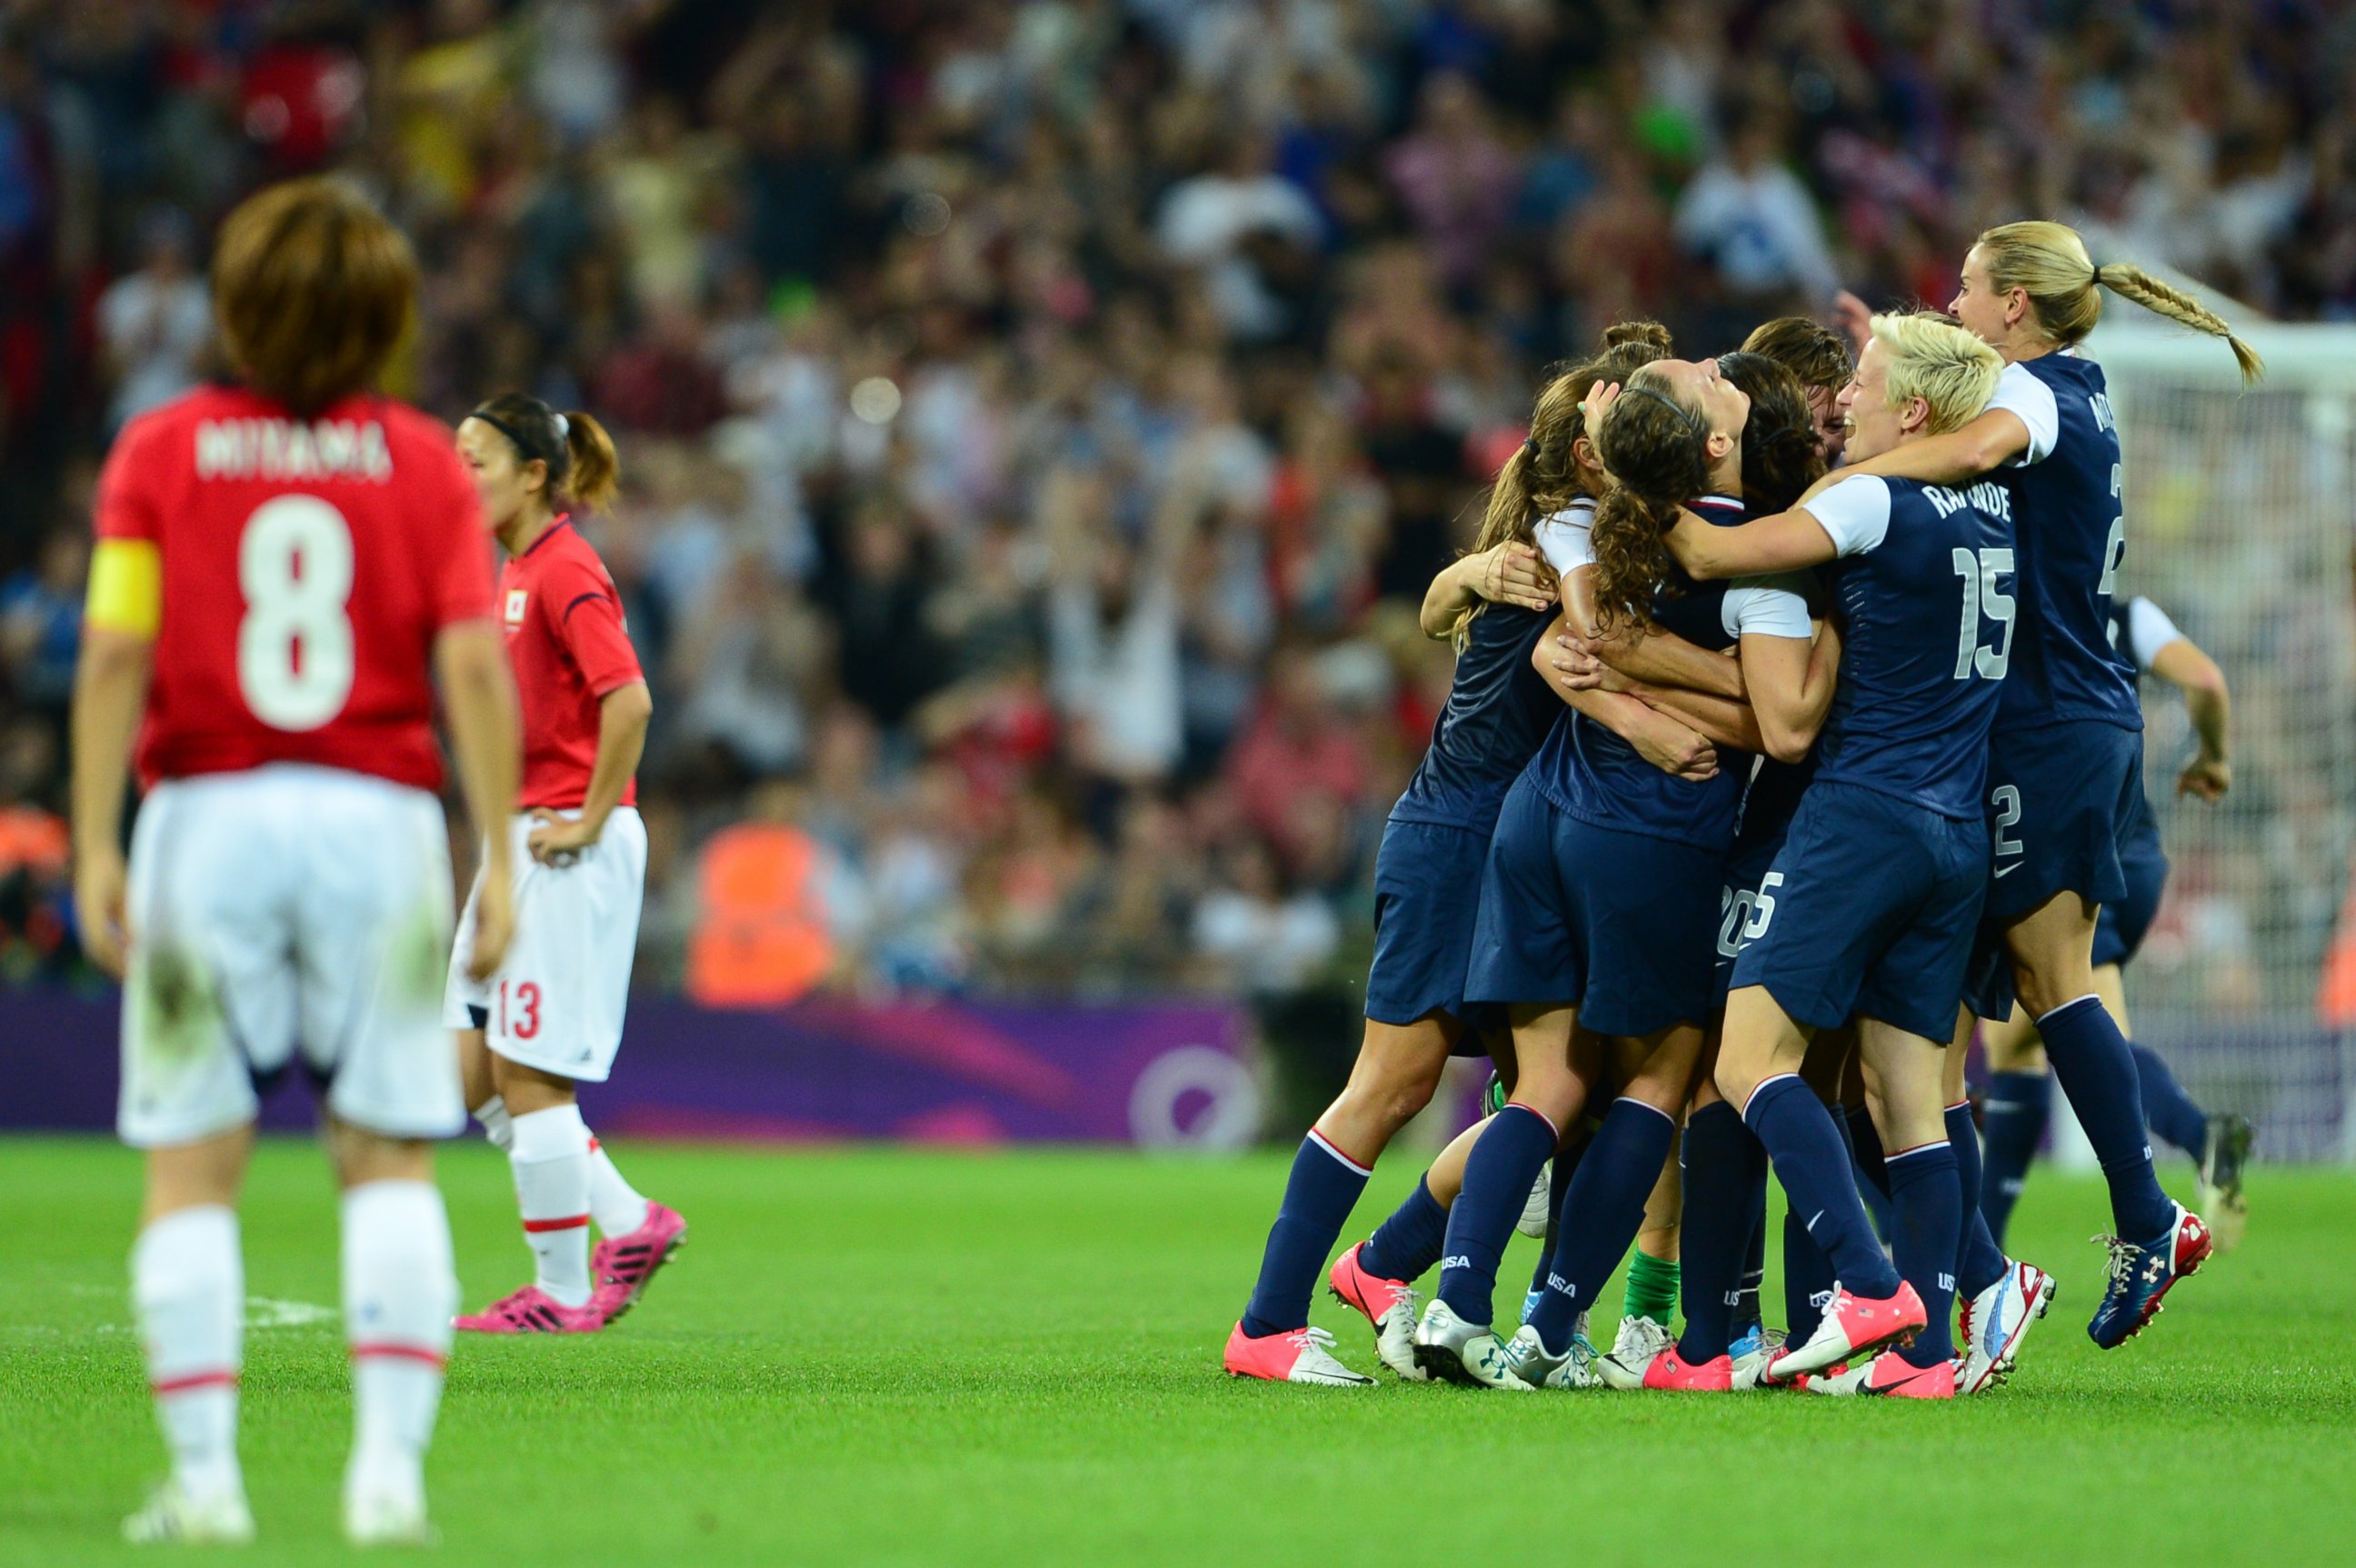 PHOTO: U.S. players celebrate winning gold against Japan during the final of the women's football competition of the London 2012 Olympic Games USA vs Japan, August 9, 2012, at Wembley stadium in London.